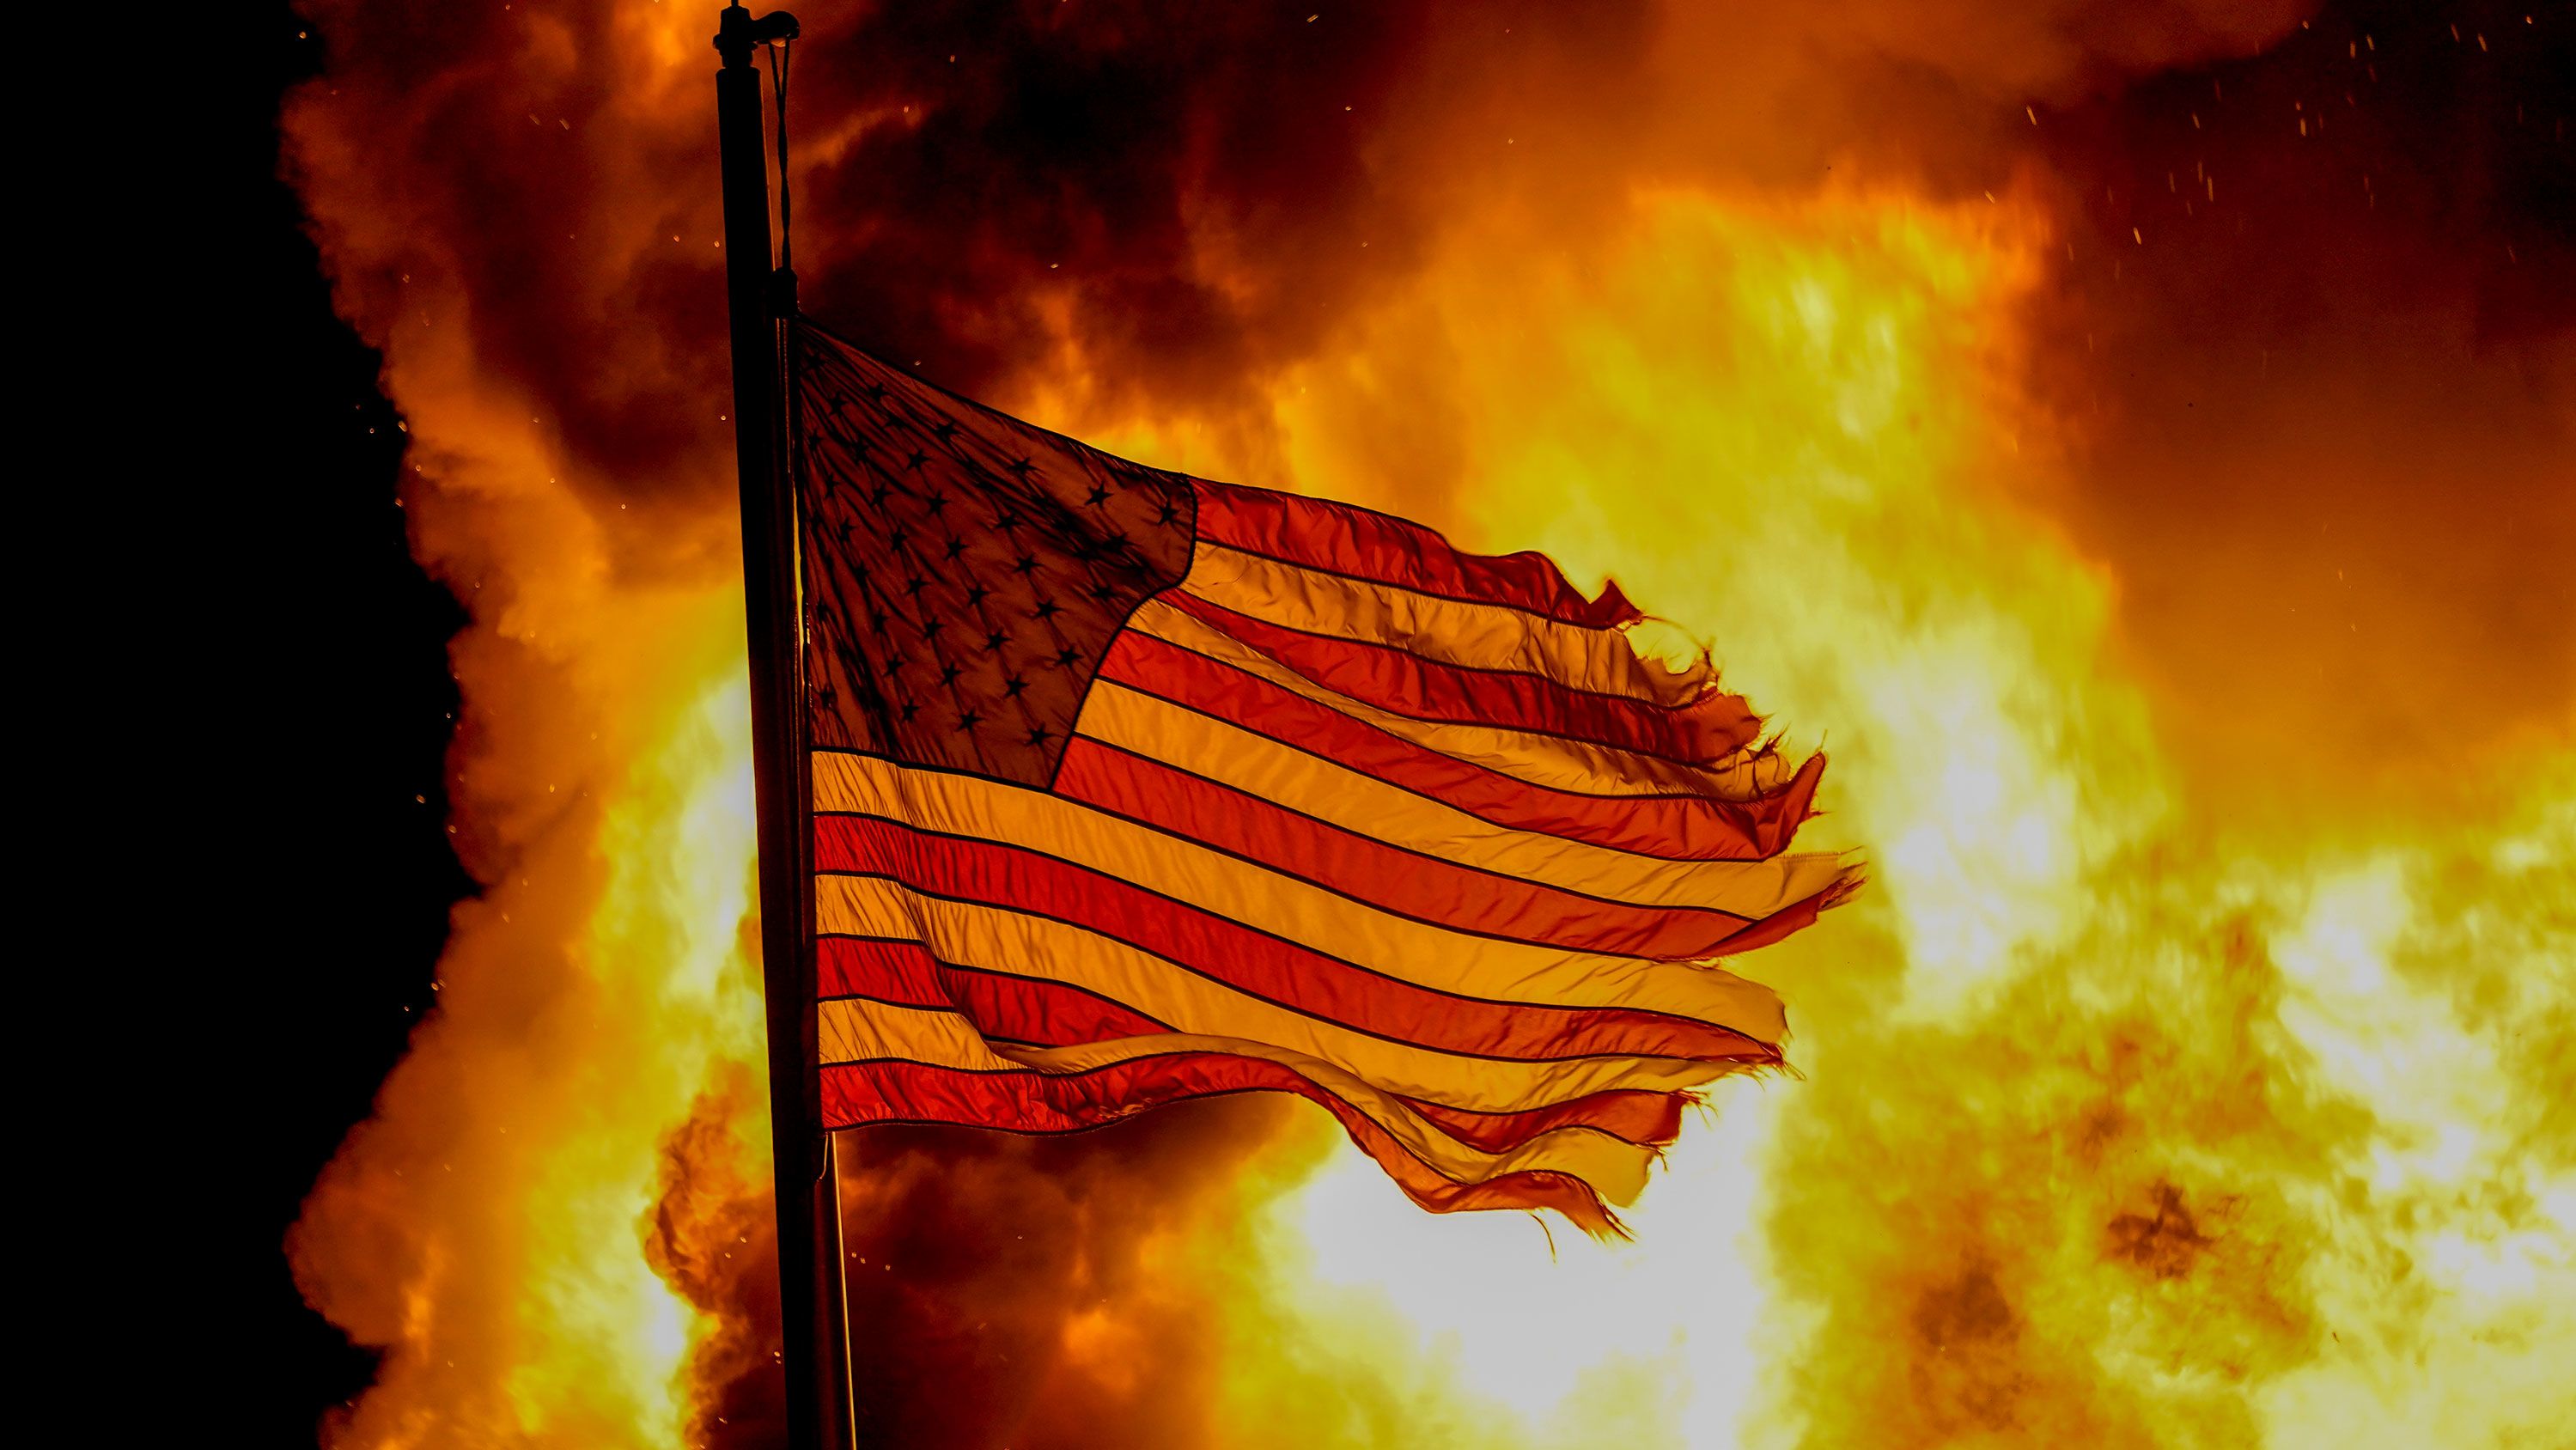 A flag flies over a department of corrections building ablaze during protests, late Monday, August 24 in Kenosha, Wisconsin, sparked by the shooting of Jacob Blake by a Kenosha Police officer a day earlier. 